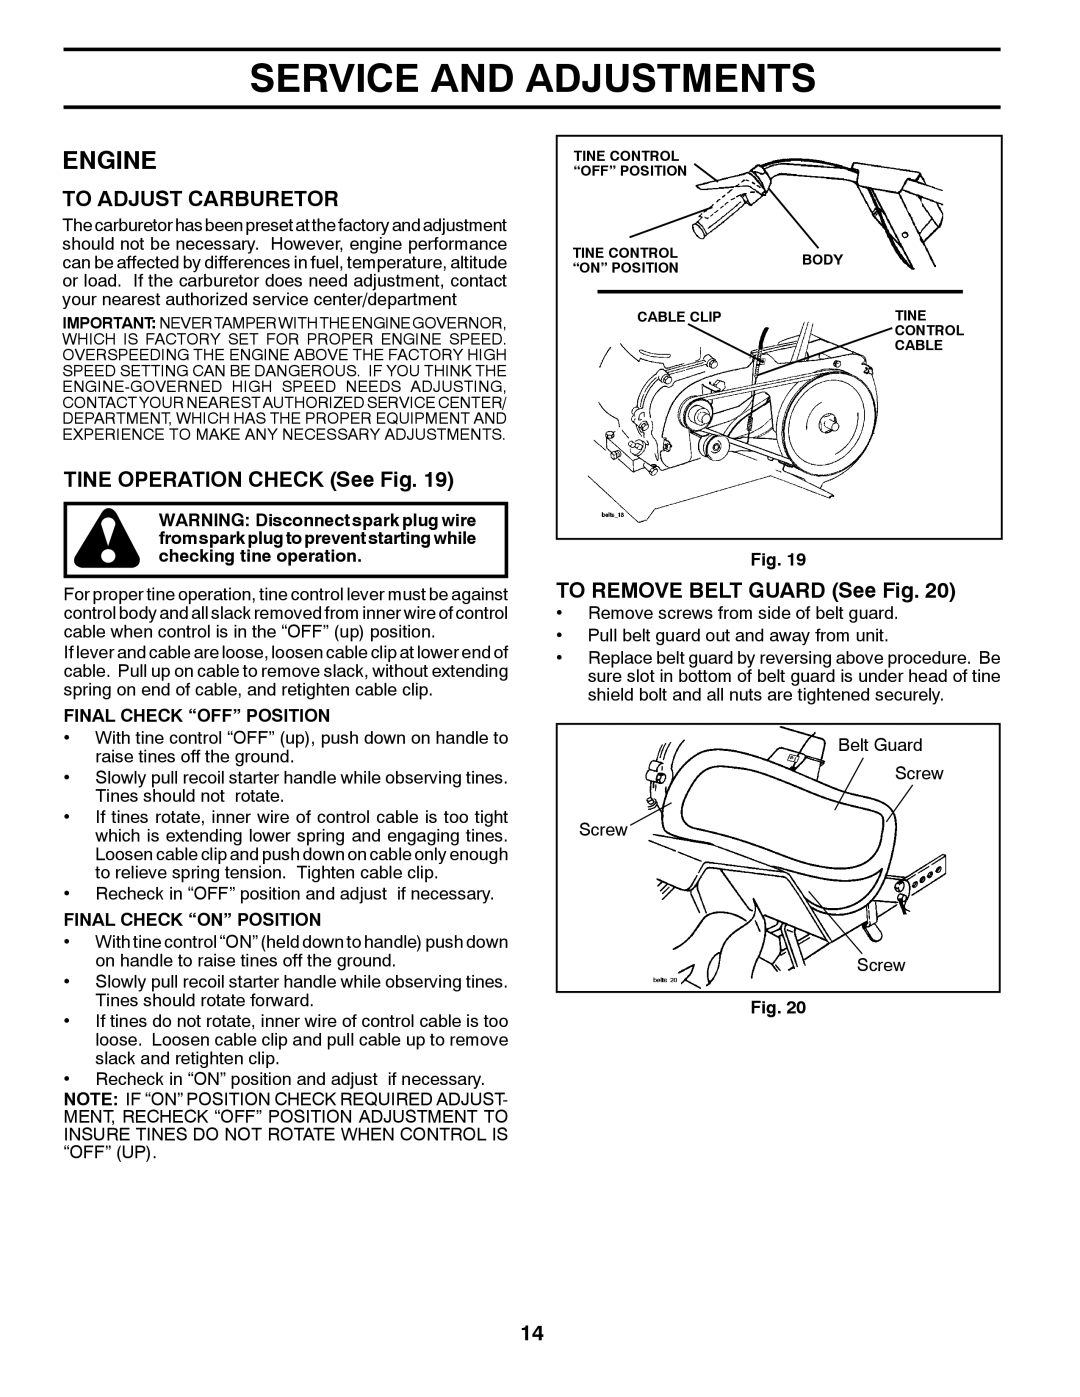 Poulan 427896 To Adjust Carburetor, TINE OPERATION CHECK See Fig, TO REMOVE BELT GUARD See Fig, Final Check “Off” Position 